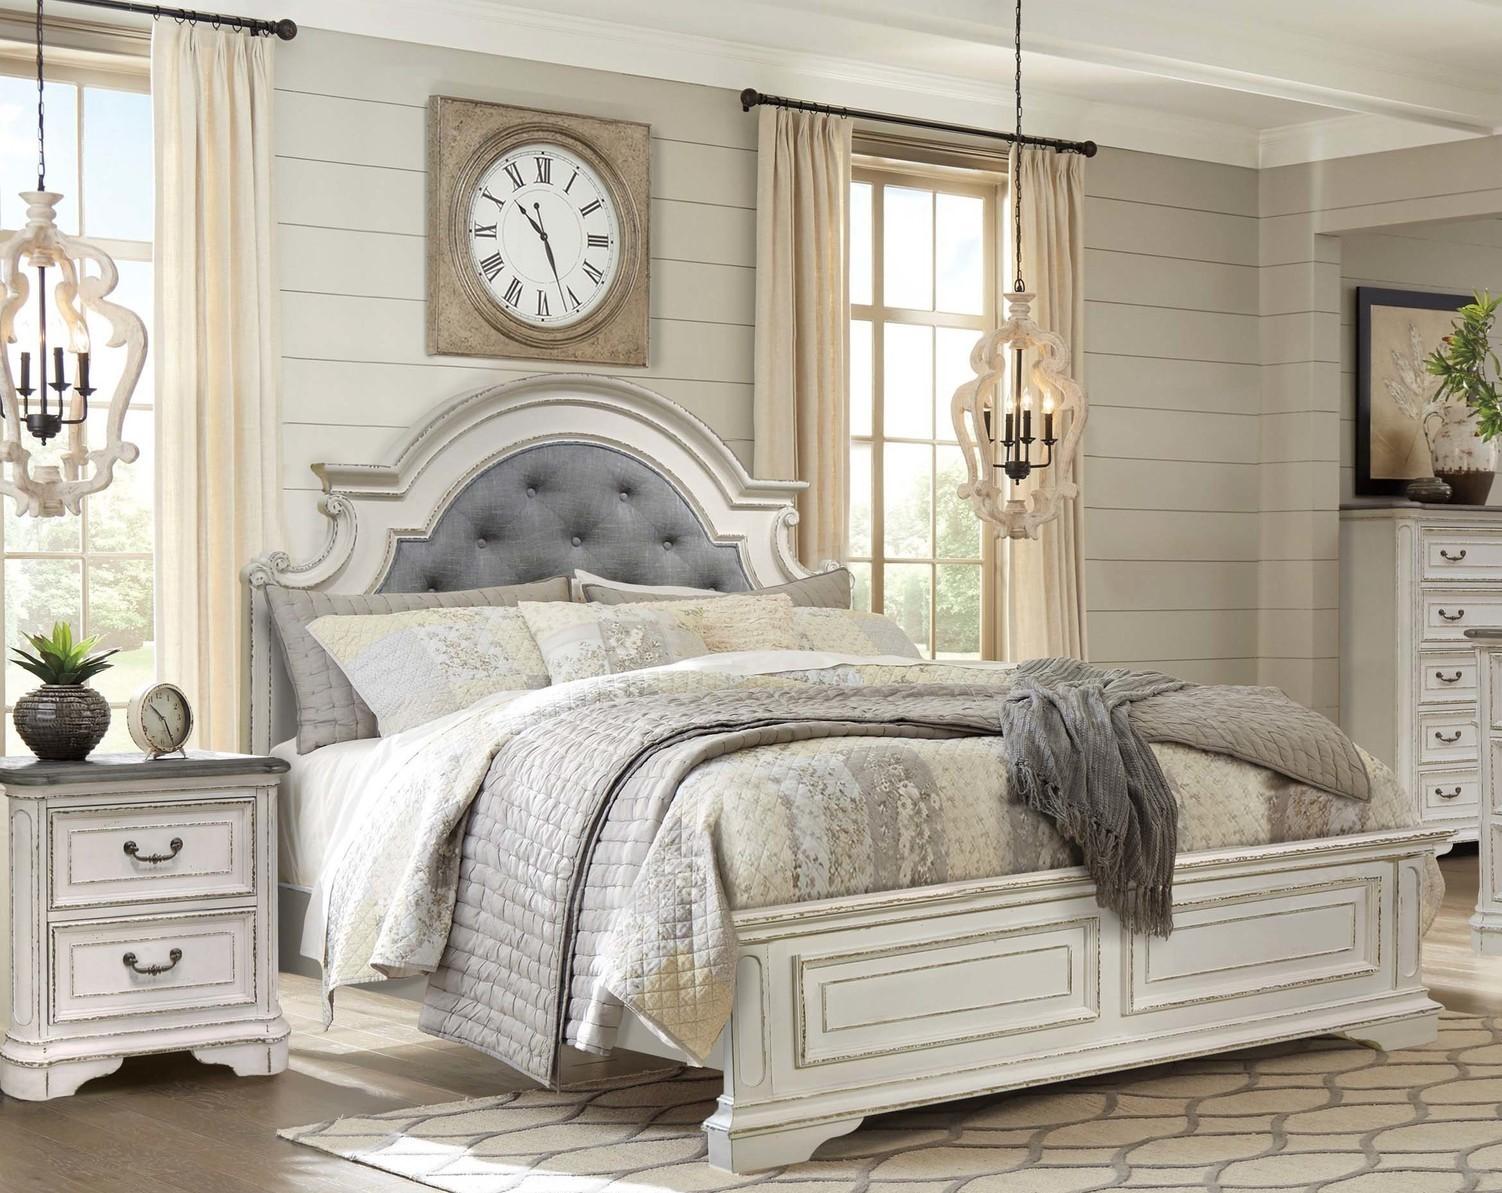 

    
Country Distressed Whitewash Upholstered Queen Bedroom Set 6Pcs McFerran B738
